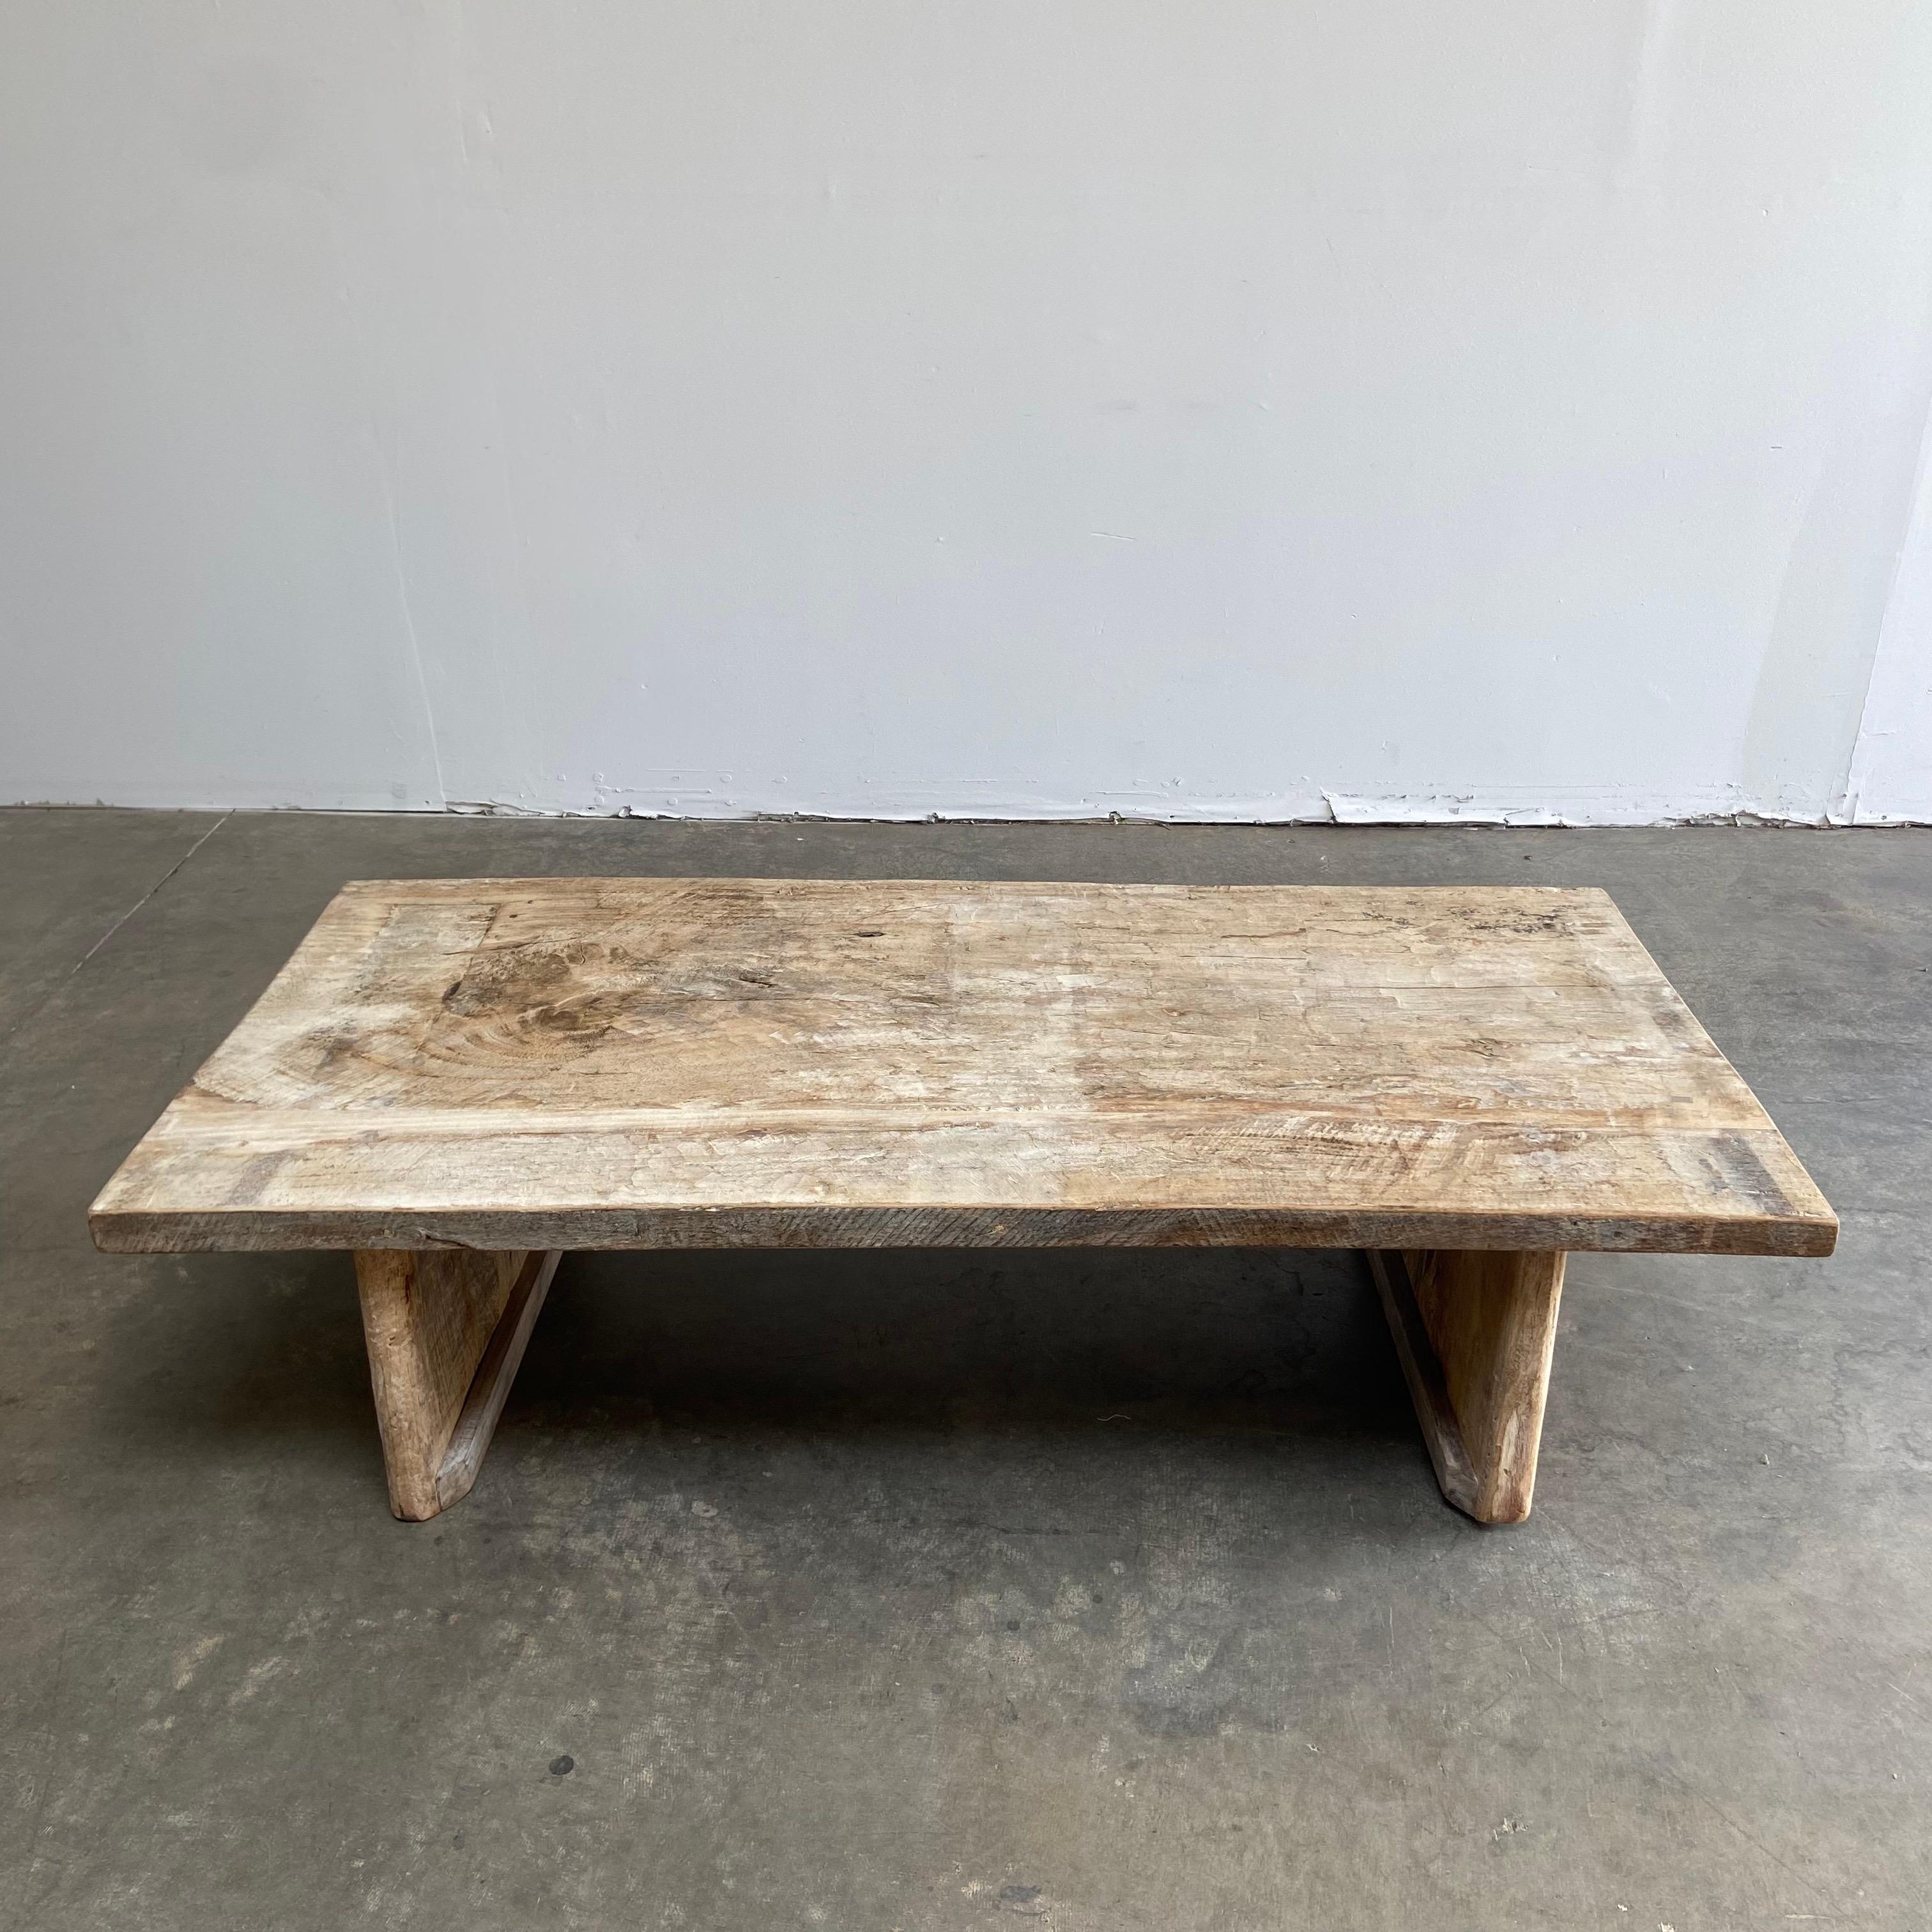 Teak coffee table 63”W x 32”D x 18”H
This item has been modified from its original version custom for you.

Beautiful rustic finish, solid and sturdy. Ready for everyday use.
Natural raw teak will age over time. Can be sealed if desired.